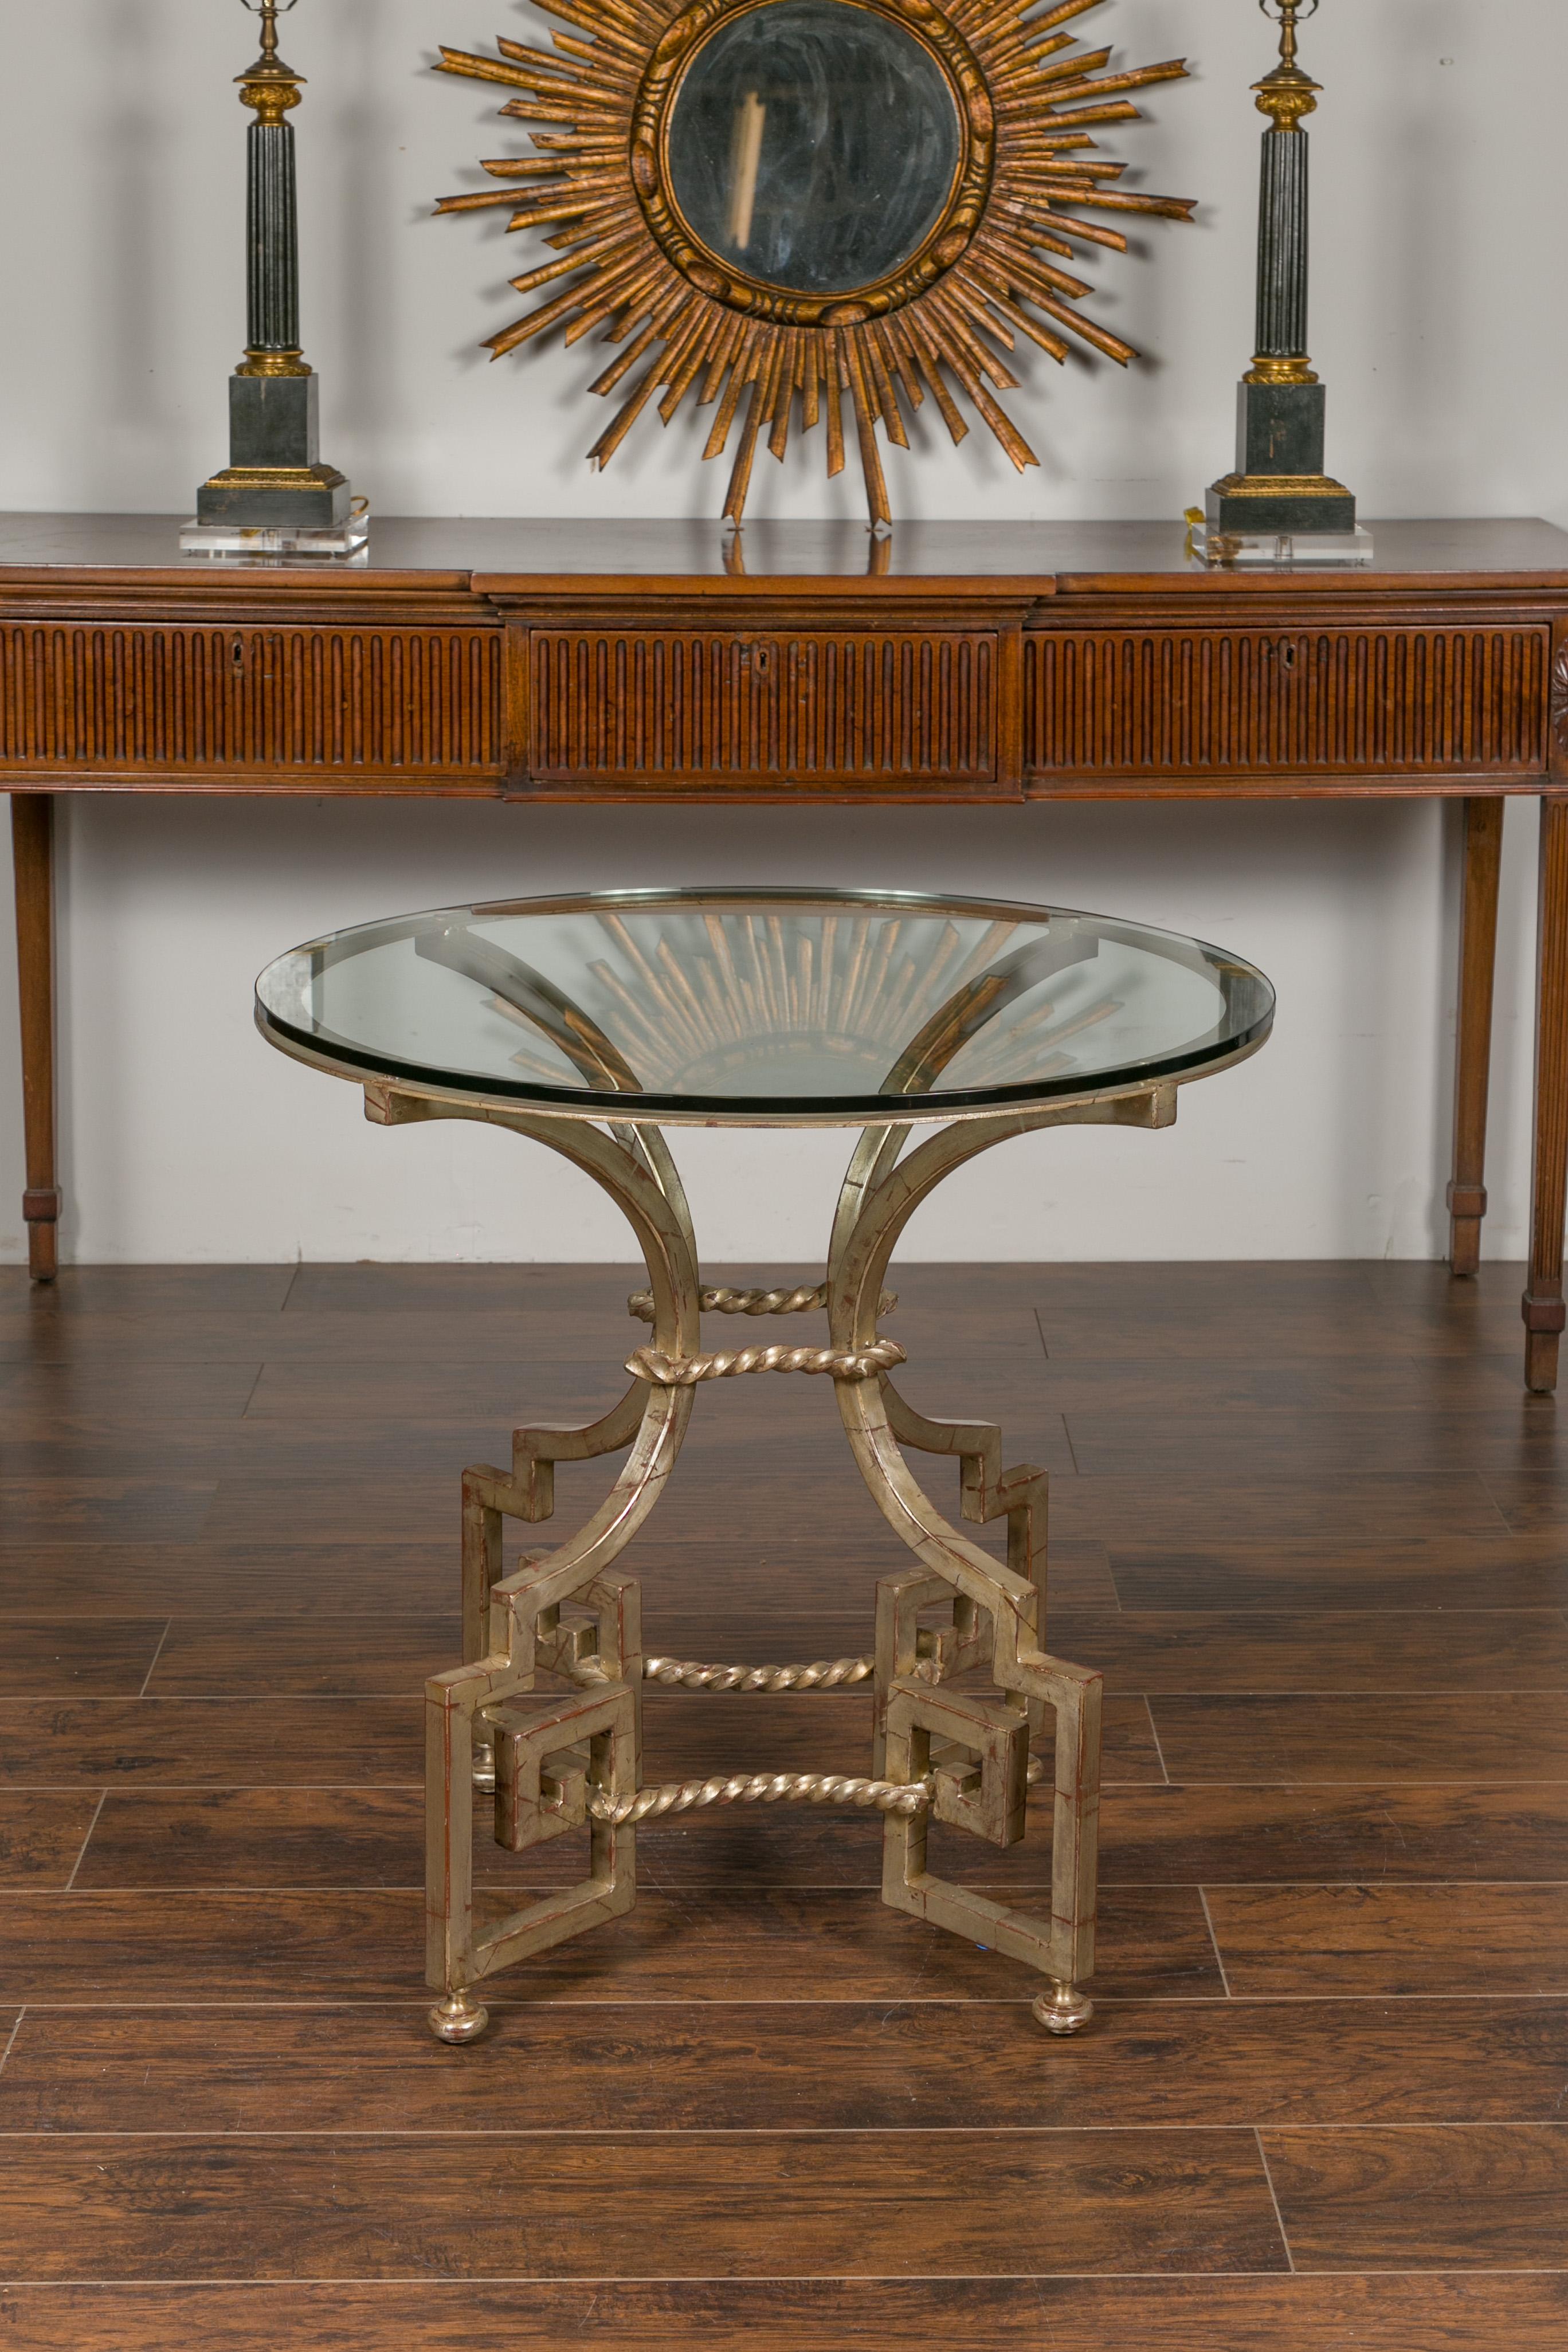 A French vintage silver leaf iron center table from the mid-20th century, with circular glass top and Greek Key motifs. Created in France during the midcentury period, this table features a circular glass top resting above a silver leaf iron base